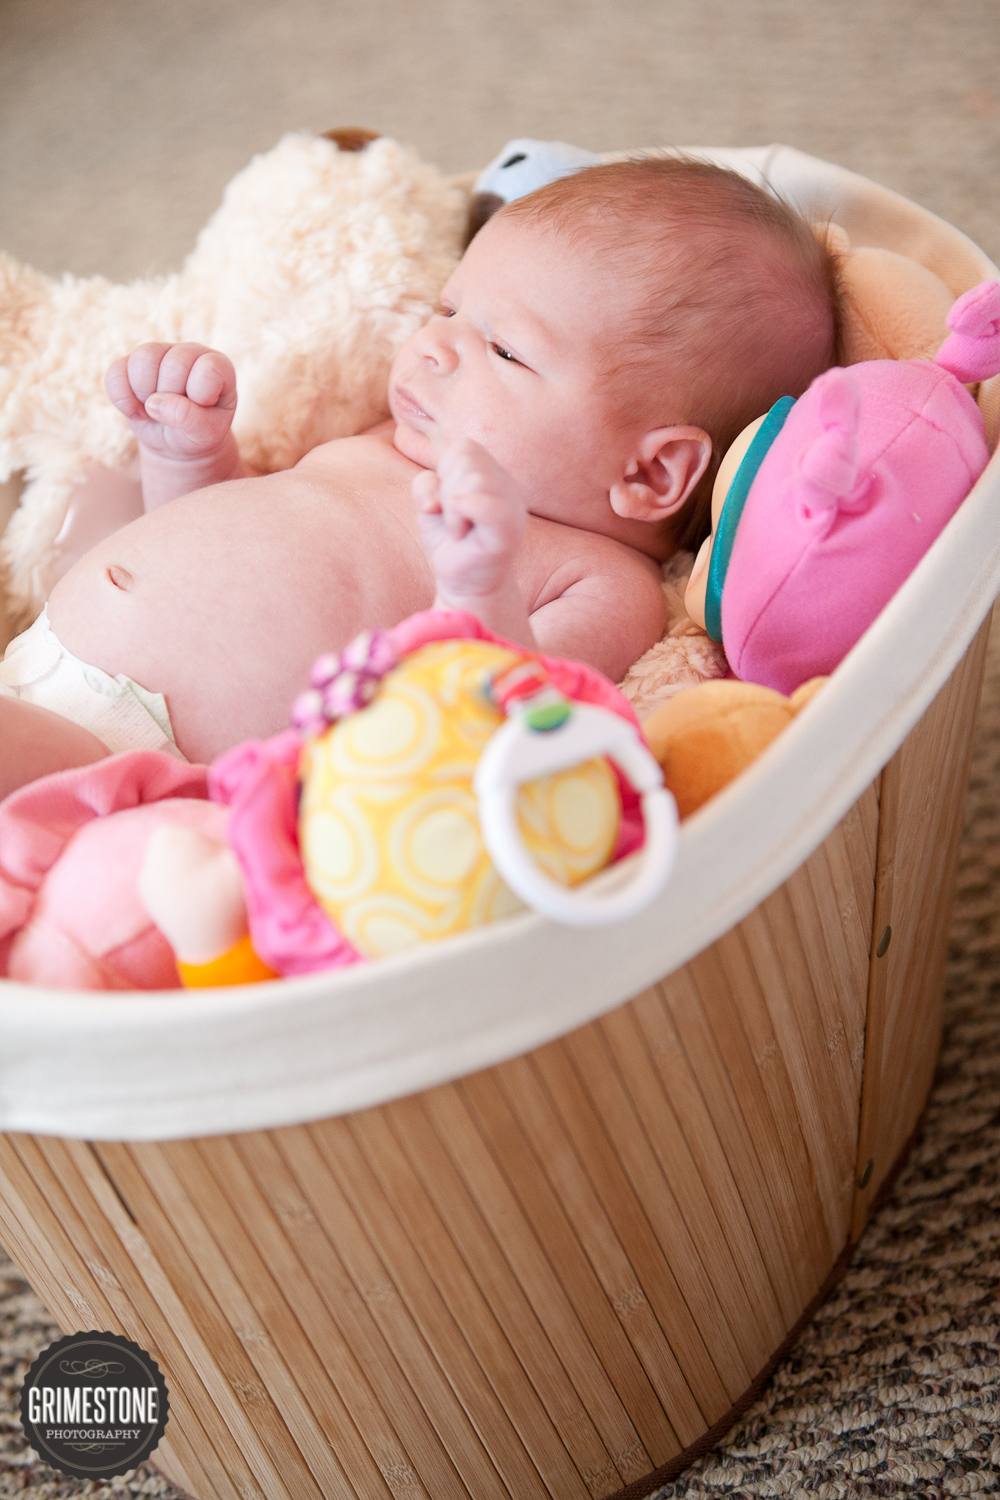 50 Things to Know Before Having a Baby